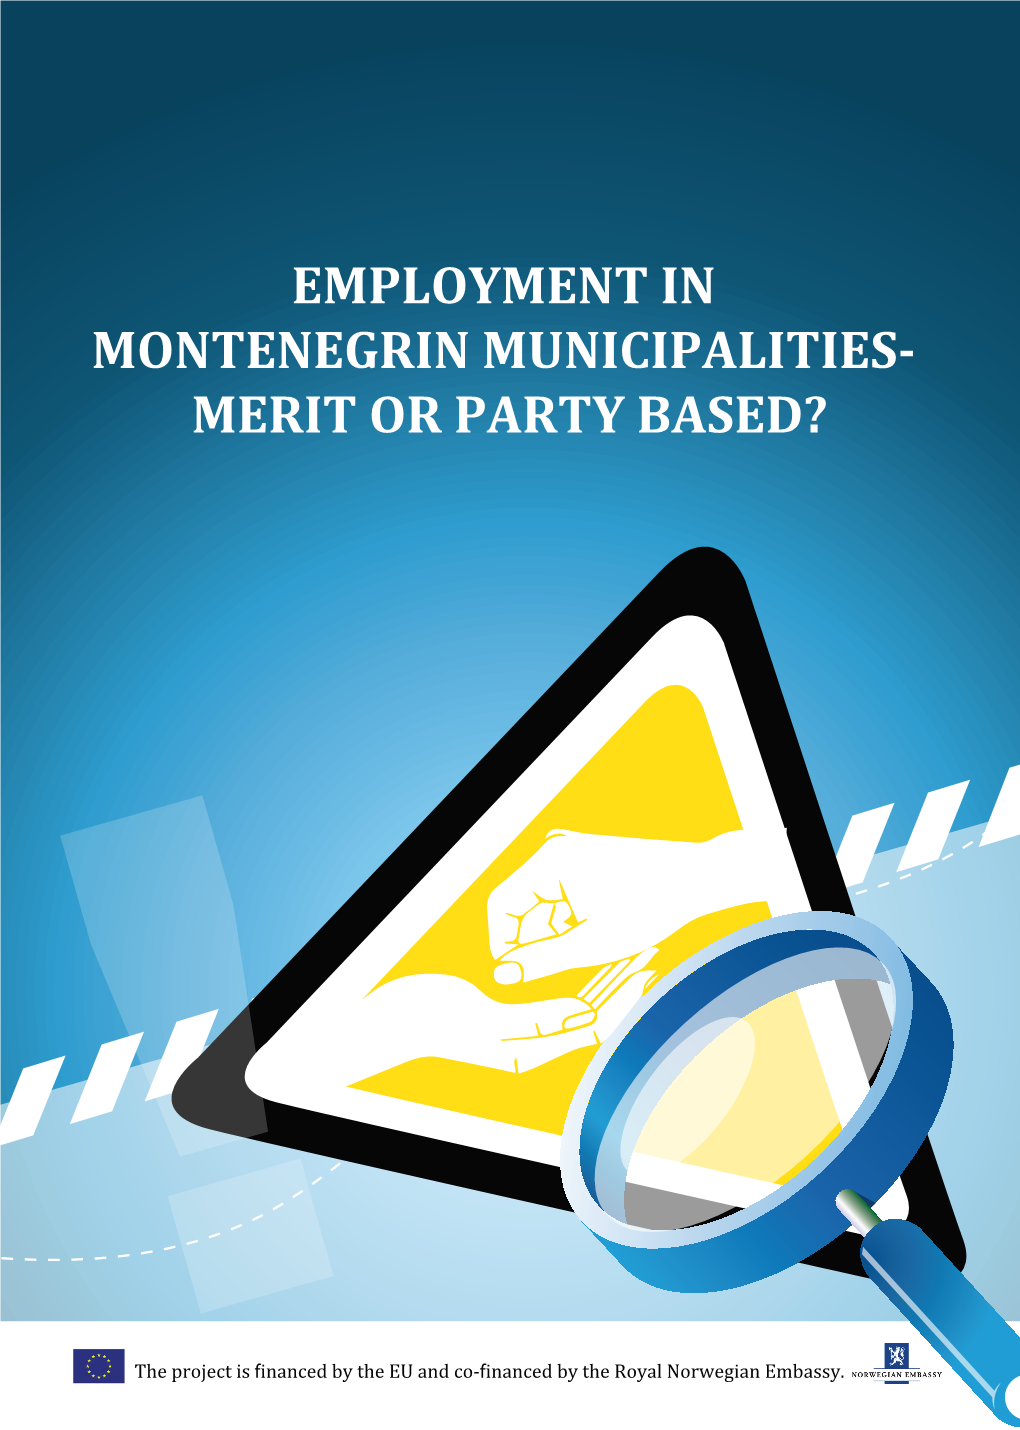 Employment in Montenegrin Municipalities- Merit Or Party Based?